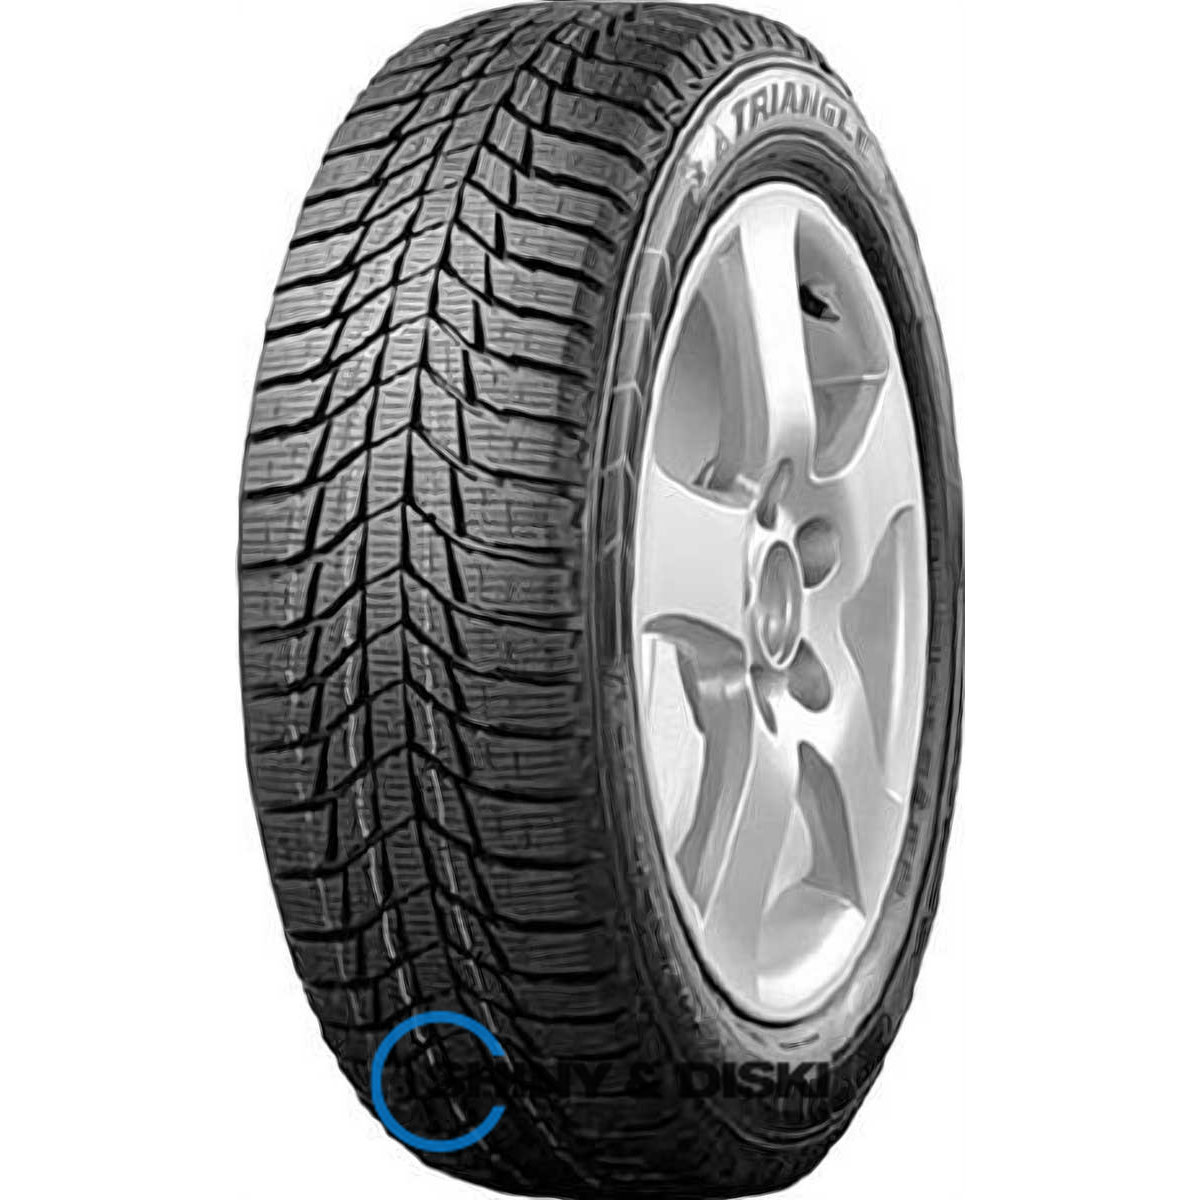 покрышки triangle pl01 225/60 r17 103r